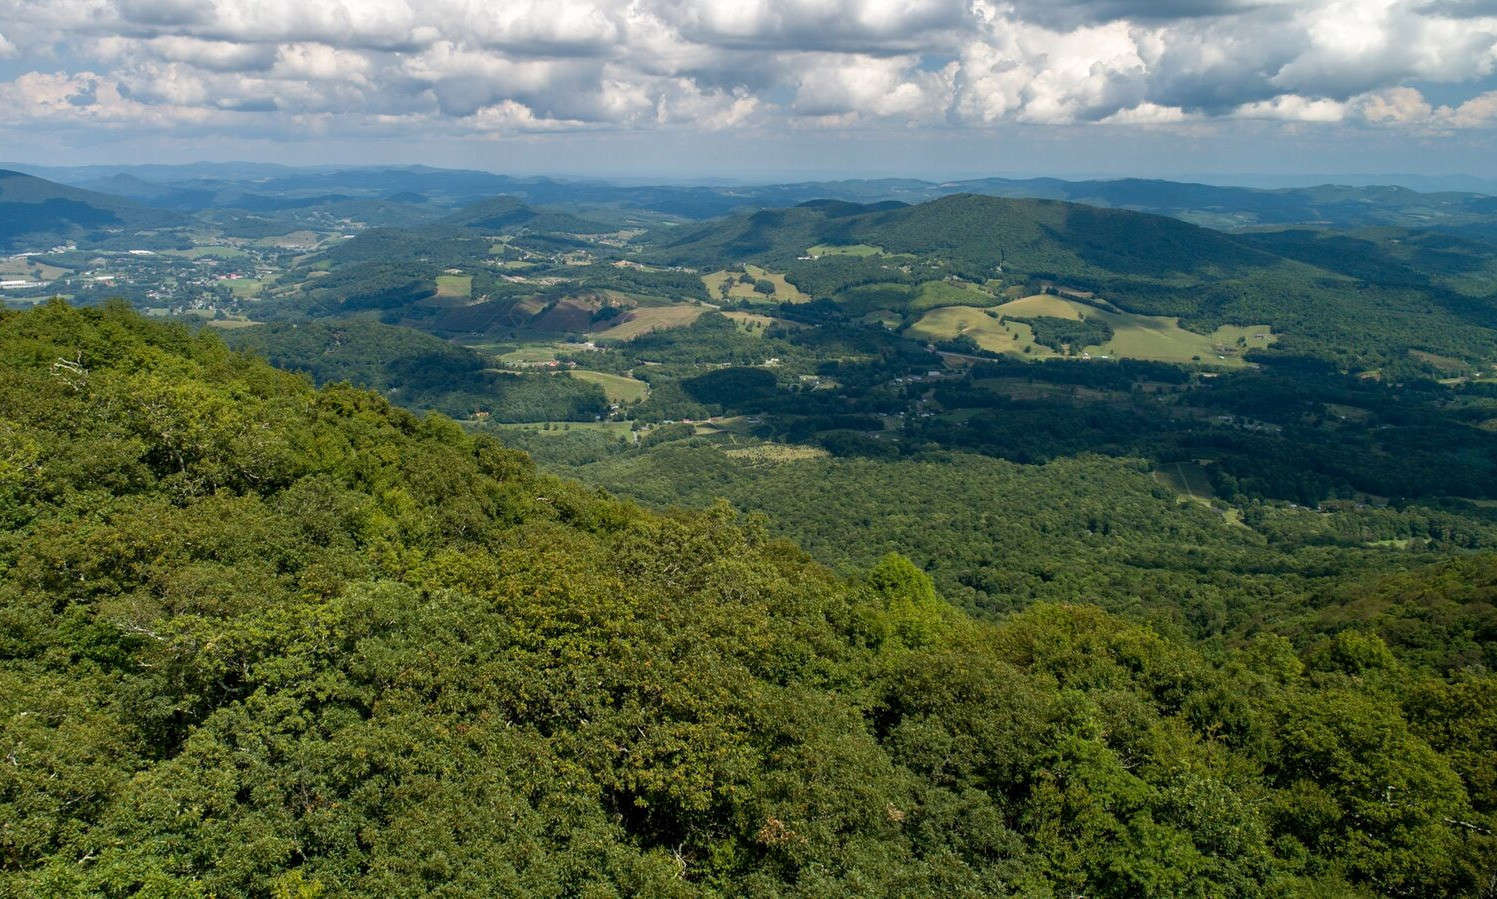 At 4,942 feet above sea level, this 11.01 acre mountain top has magnificent 360 degree long-range, layered mountain views into TN, VA and NC vistas, distinctive topography, beautiful rock outcroppings and a diverse mixture of native trees and plants.